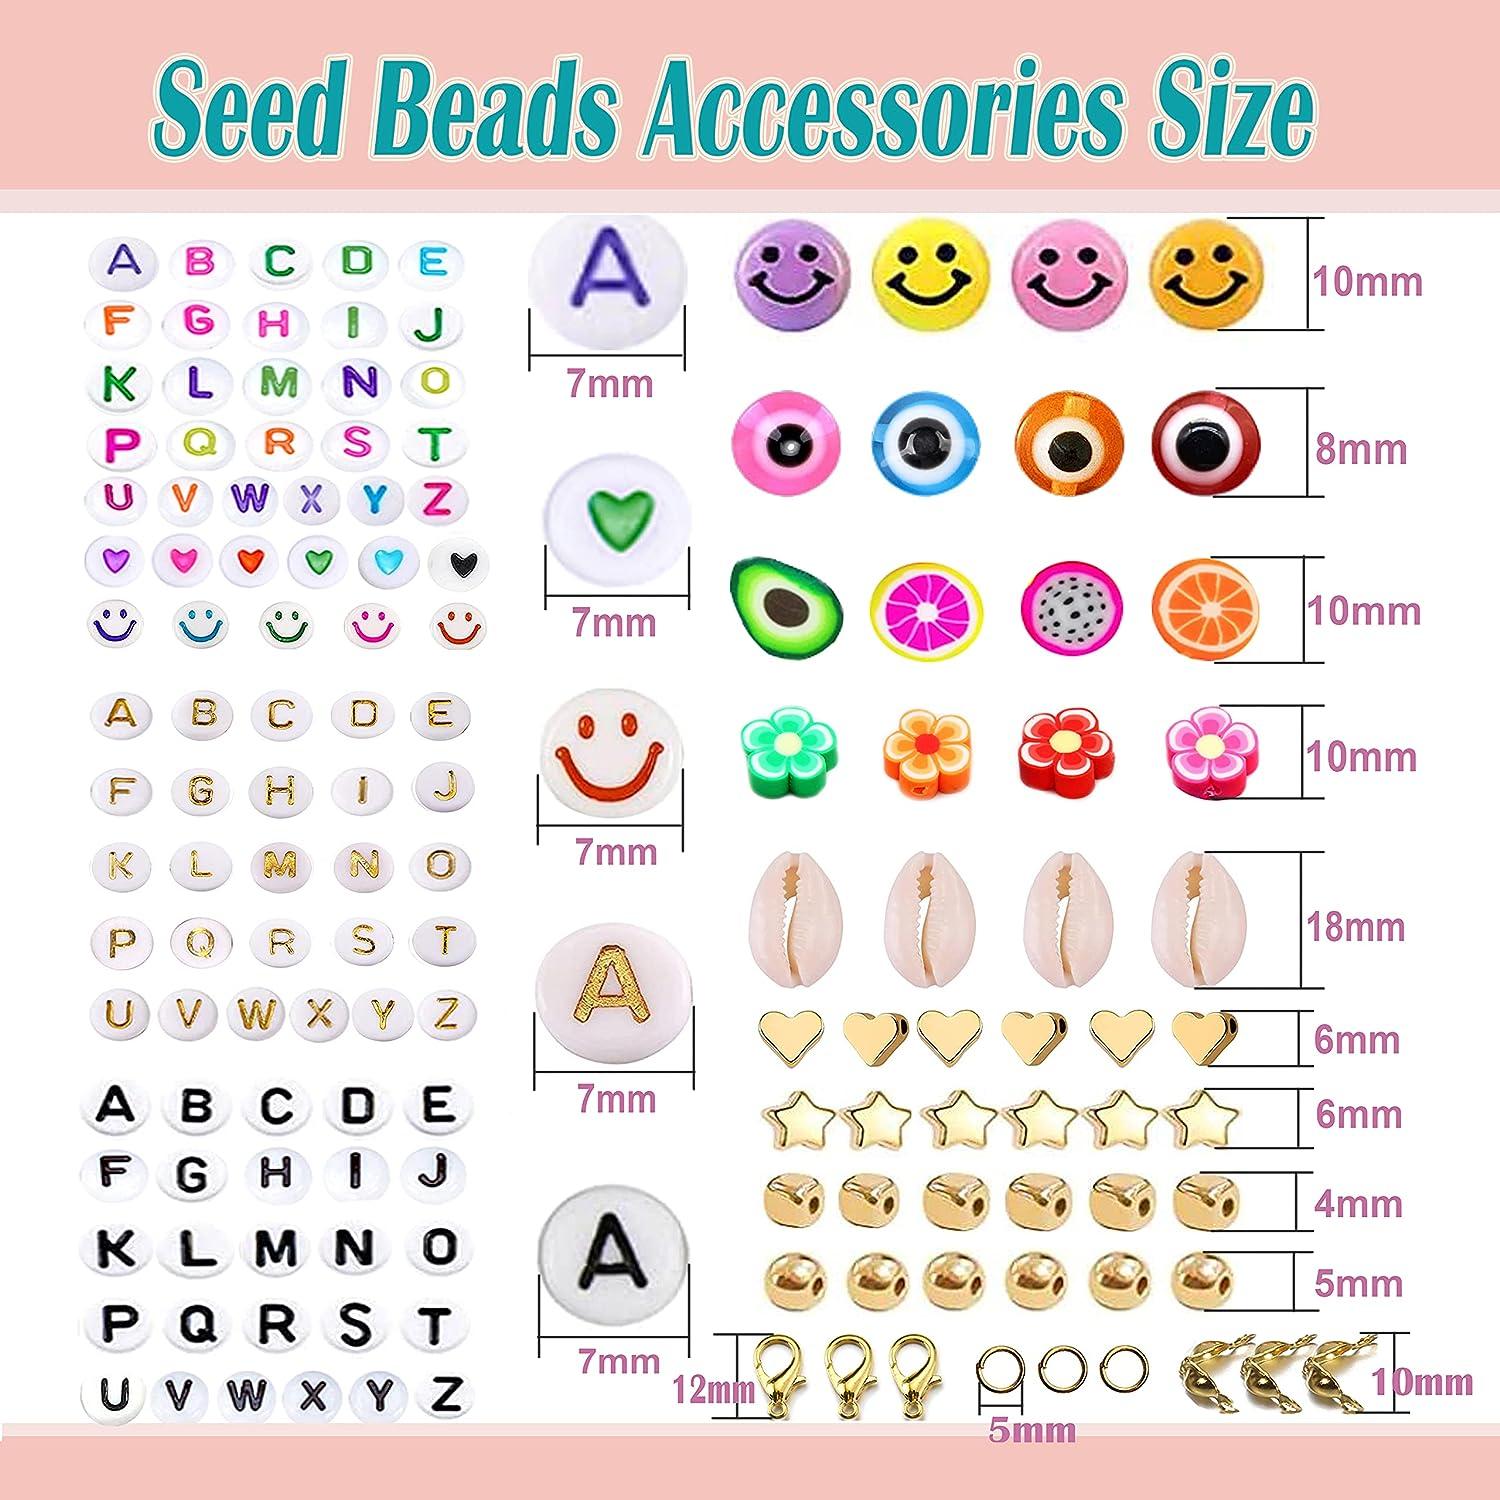 50600pcs 96 Colors 2mm Glass Seed Beads for Jewelry Making Kit, 300pcs  Letter Beads, Small Seed Beads Kit for Bracelets Necklace Ring Making, DIY